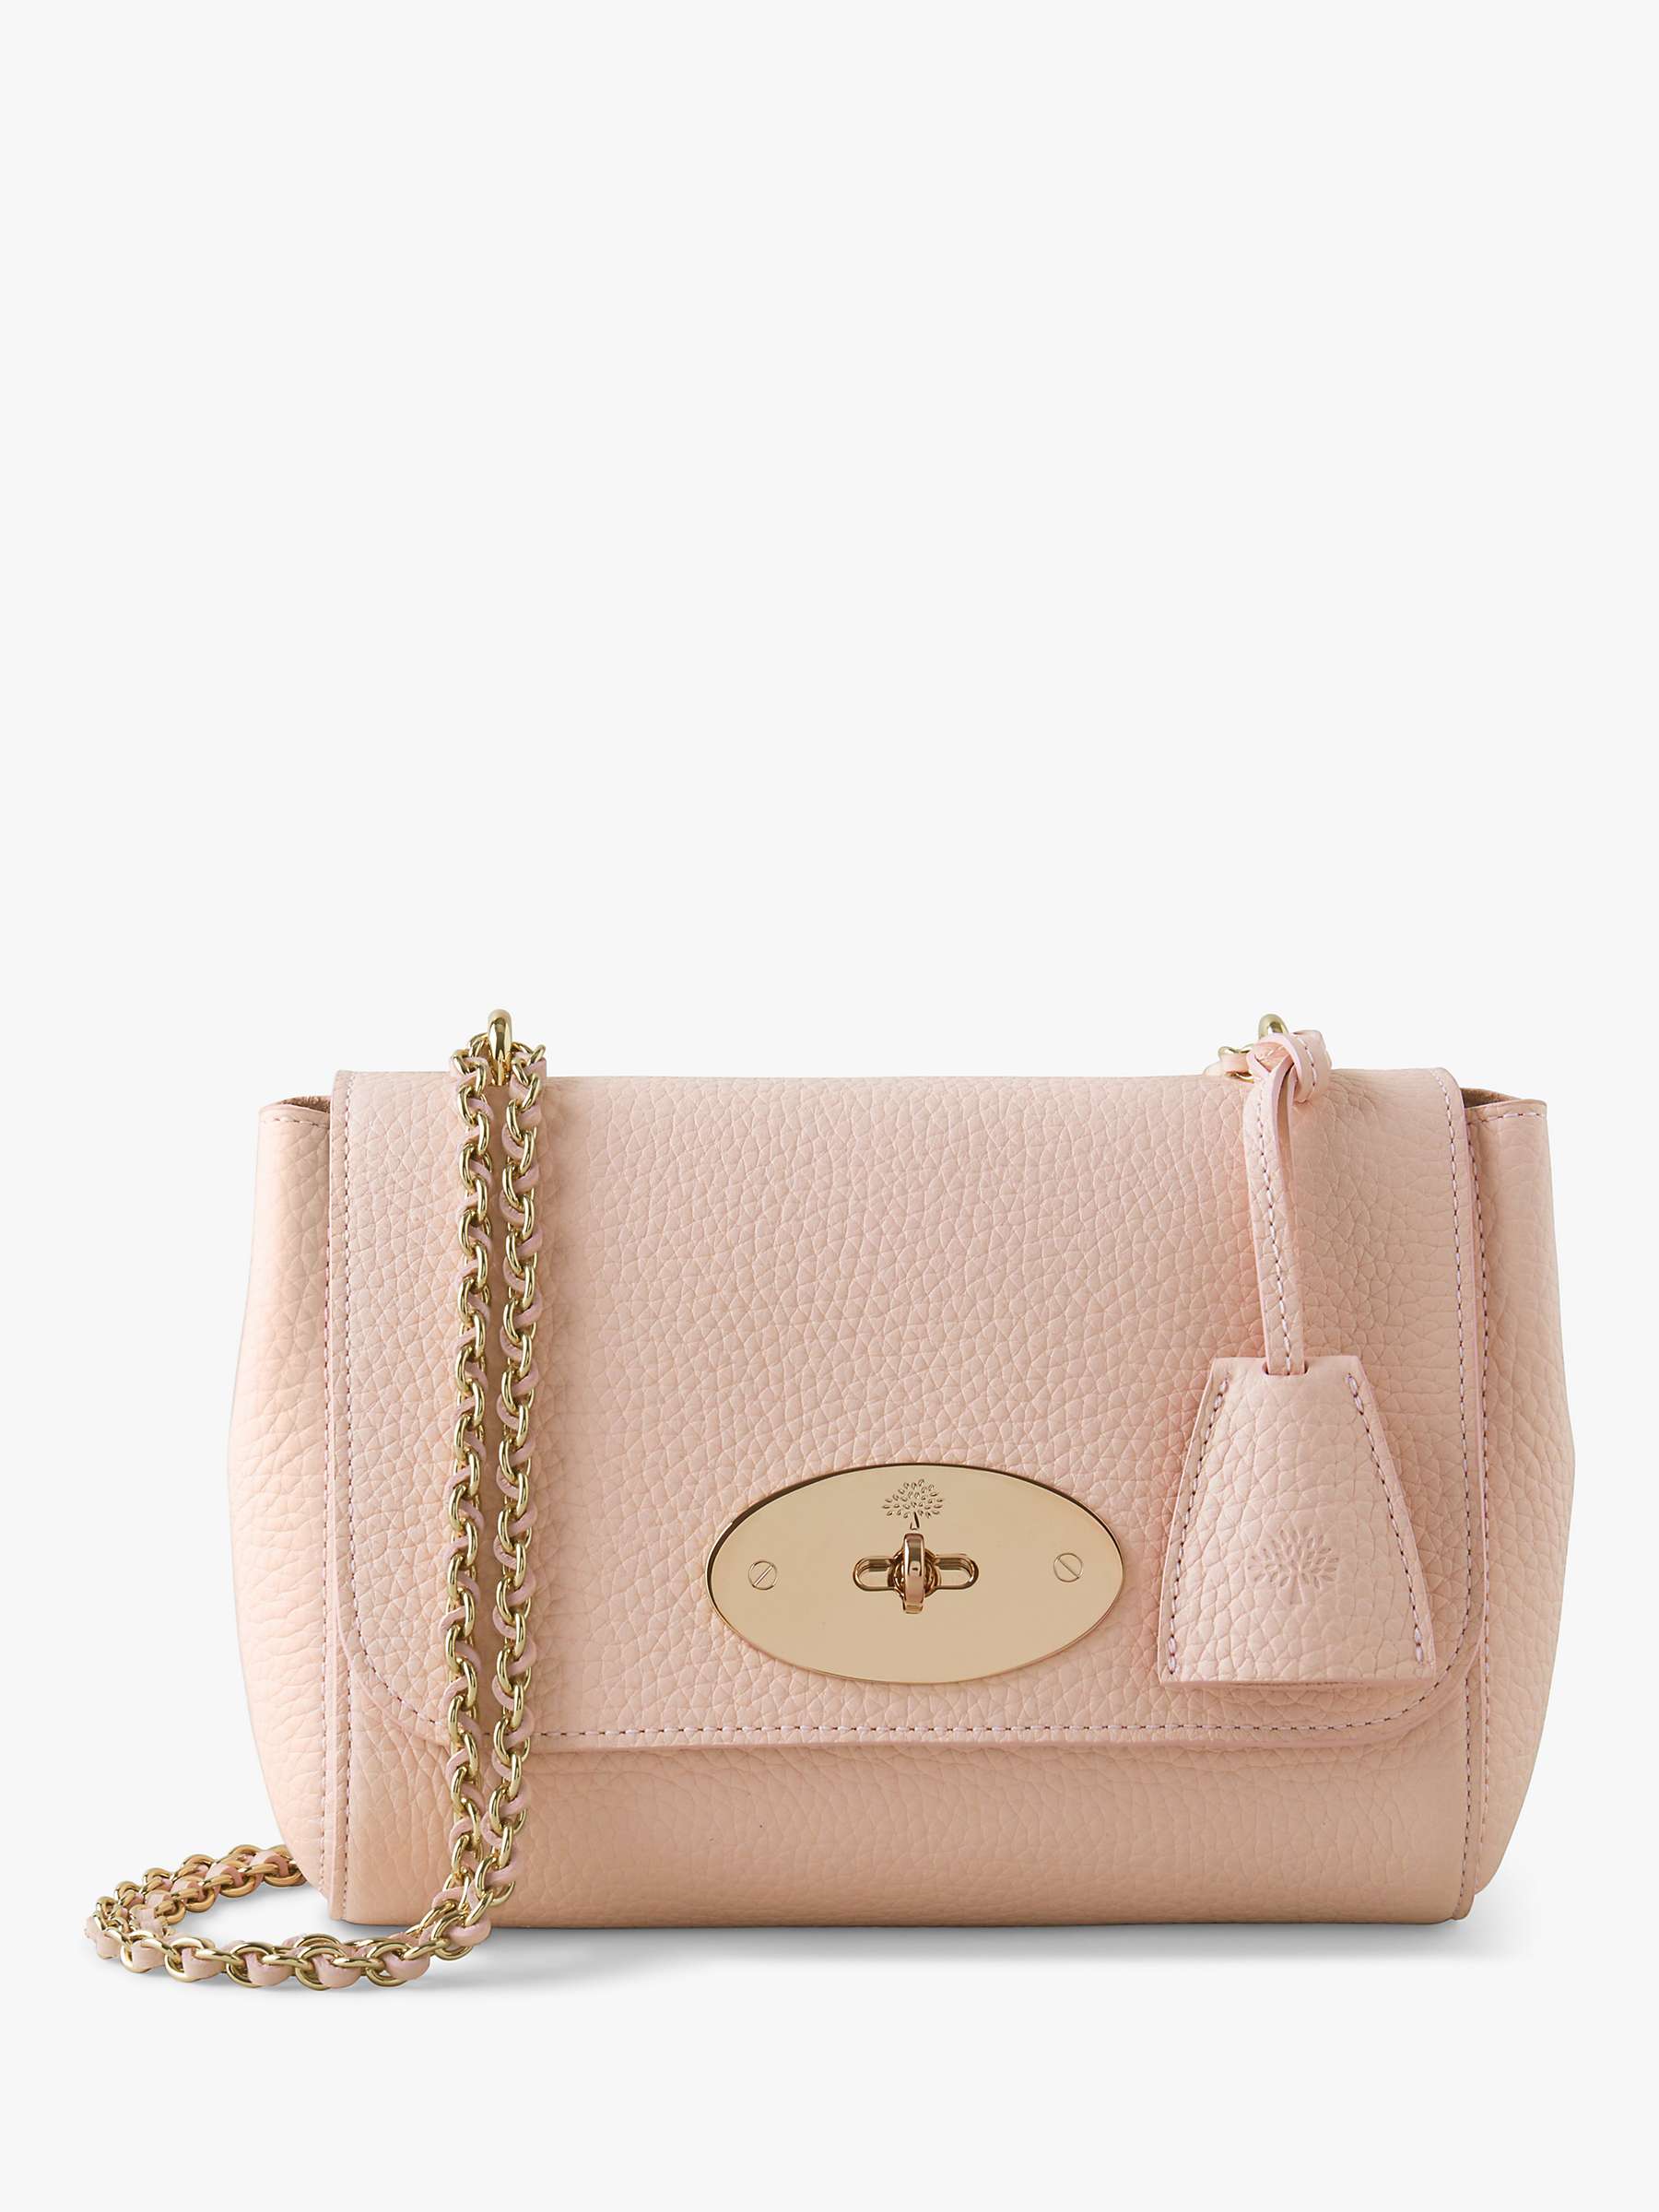 Buy Mulberry Lily Heavy Grain Leather Shoulder Bag Online at johnlewis.com